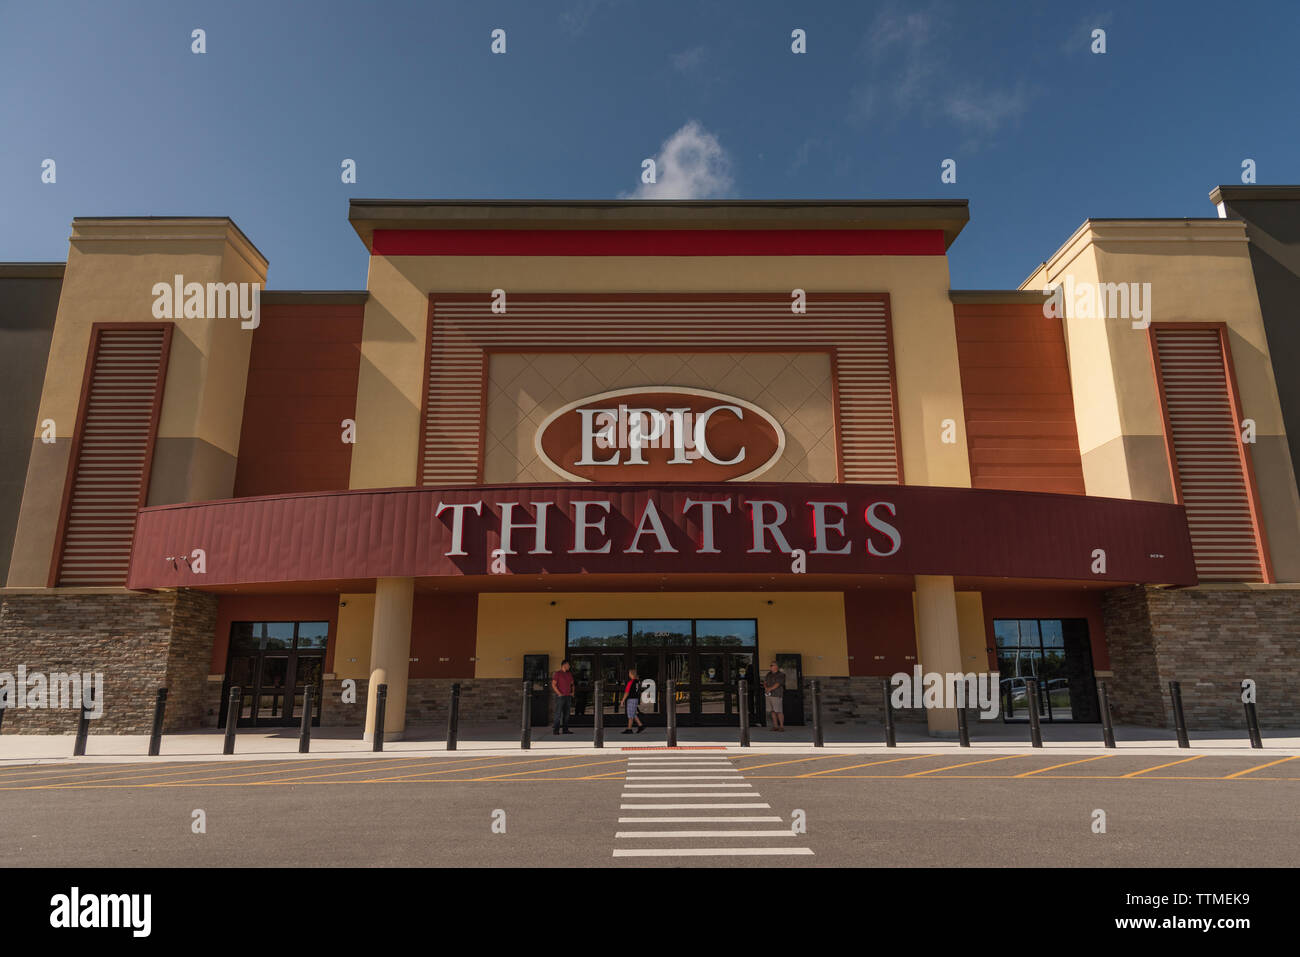 Movie Theater Exterior High Resolution Stock Photography And Images - Alamy